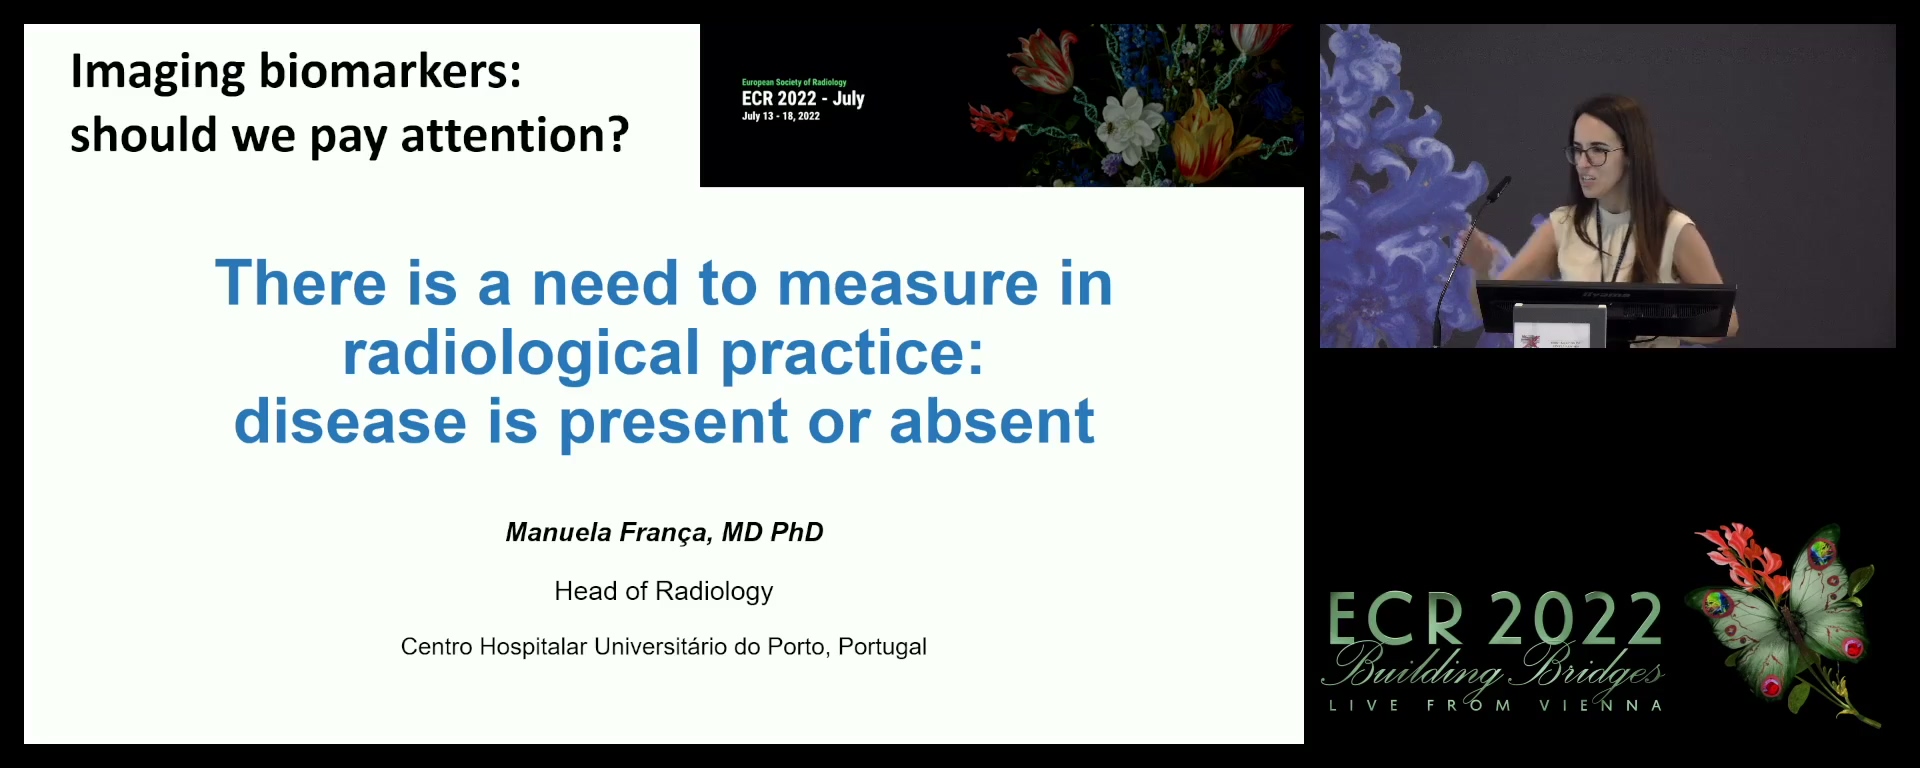 There is a need to measure in radiological practice: disease is present or absent: pro